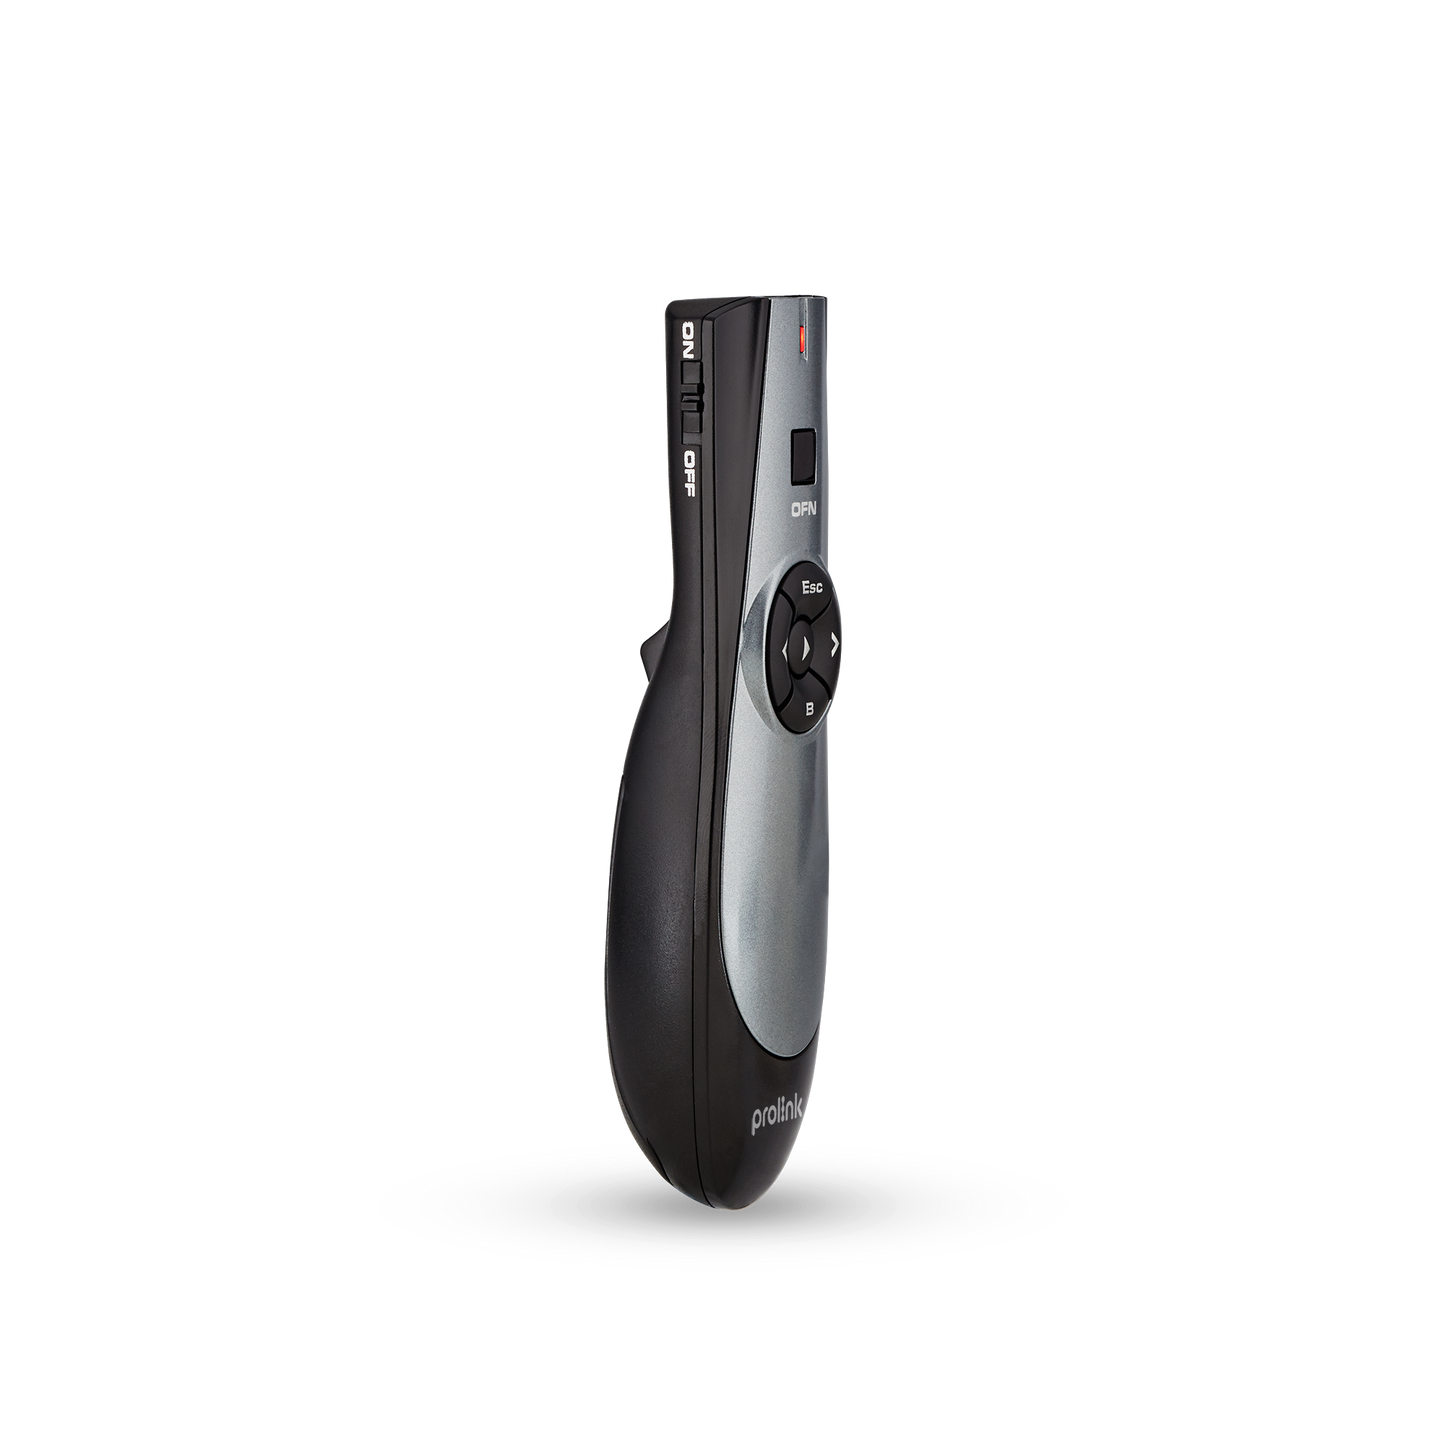 Wireless Presenter with Air Mouse